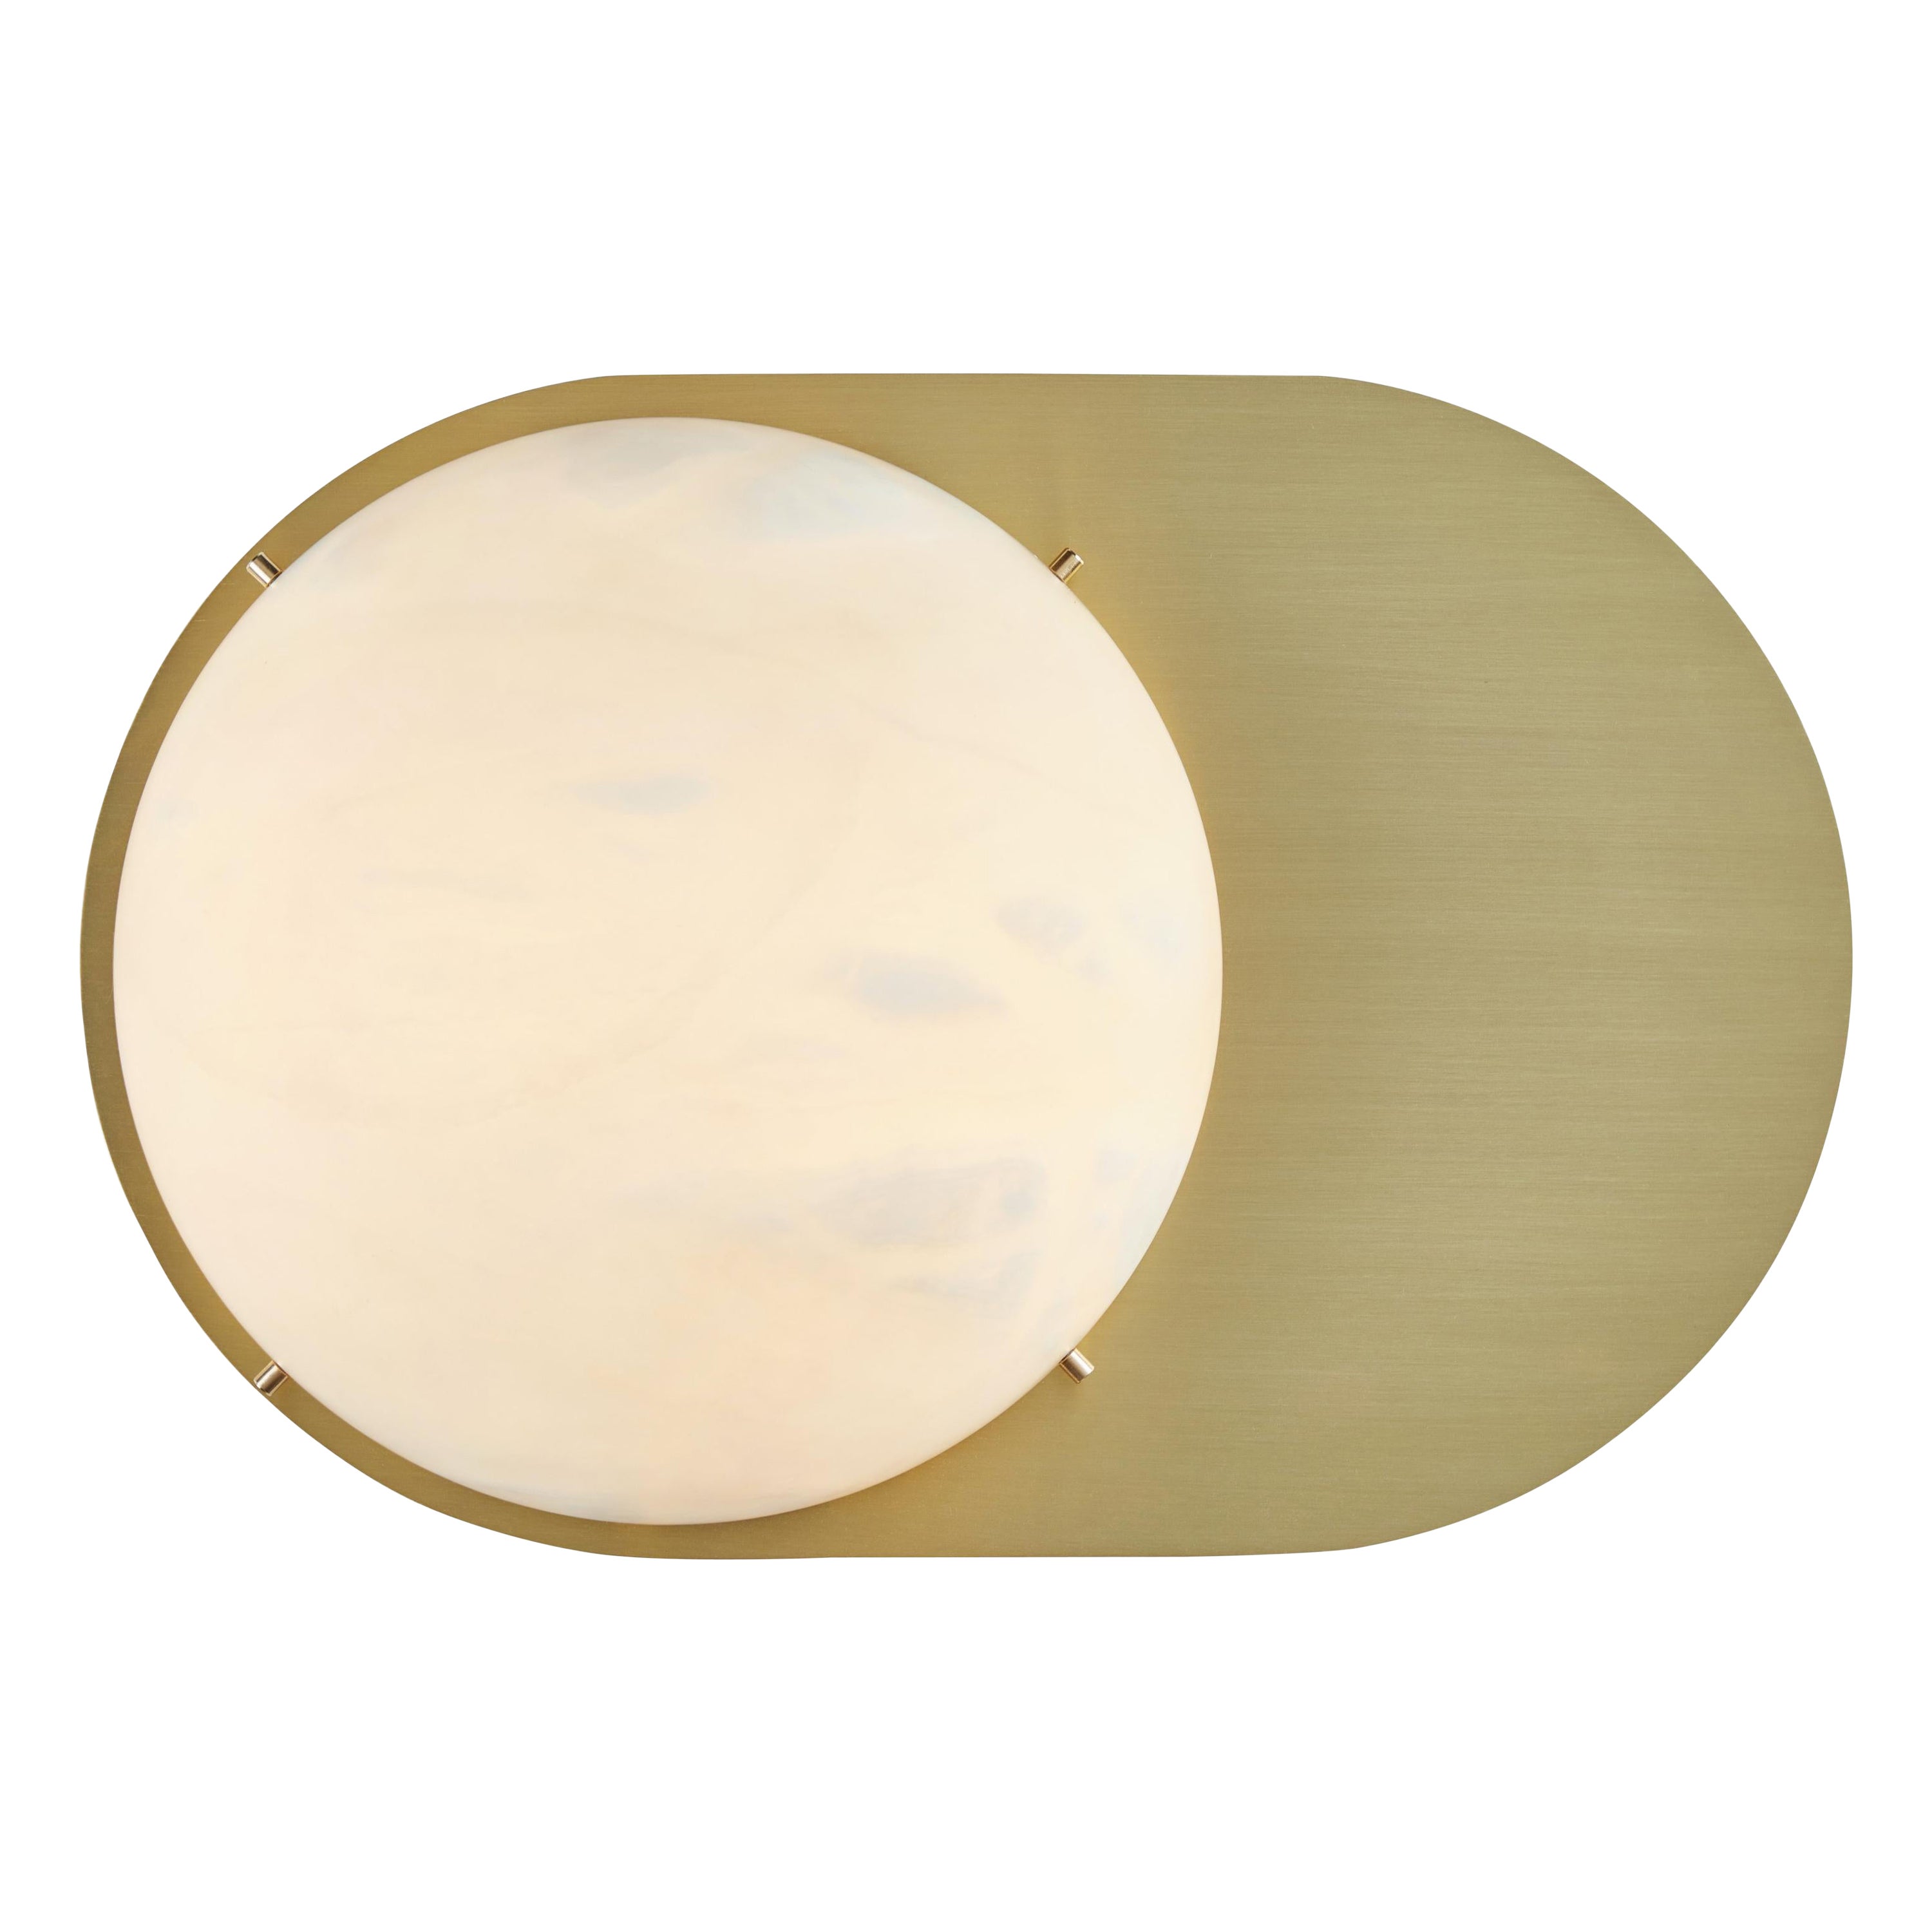 Large 'Toogle' Sconce in Brass and Alabaster